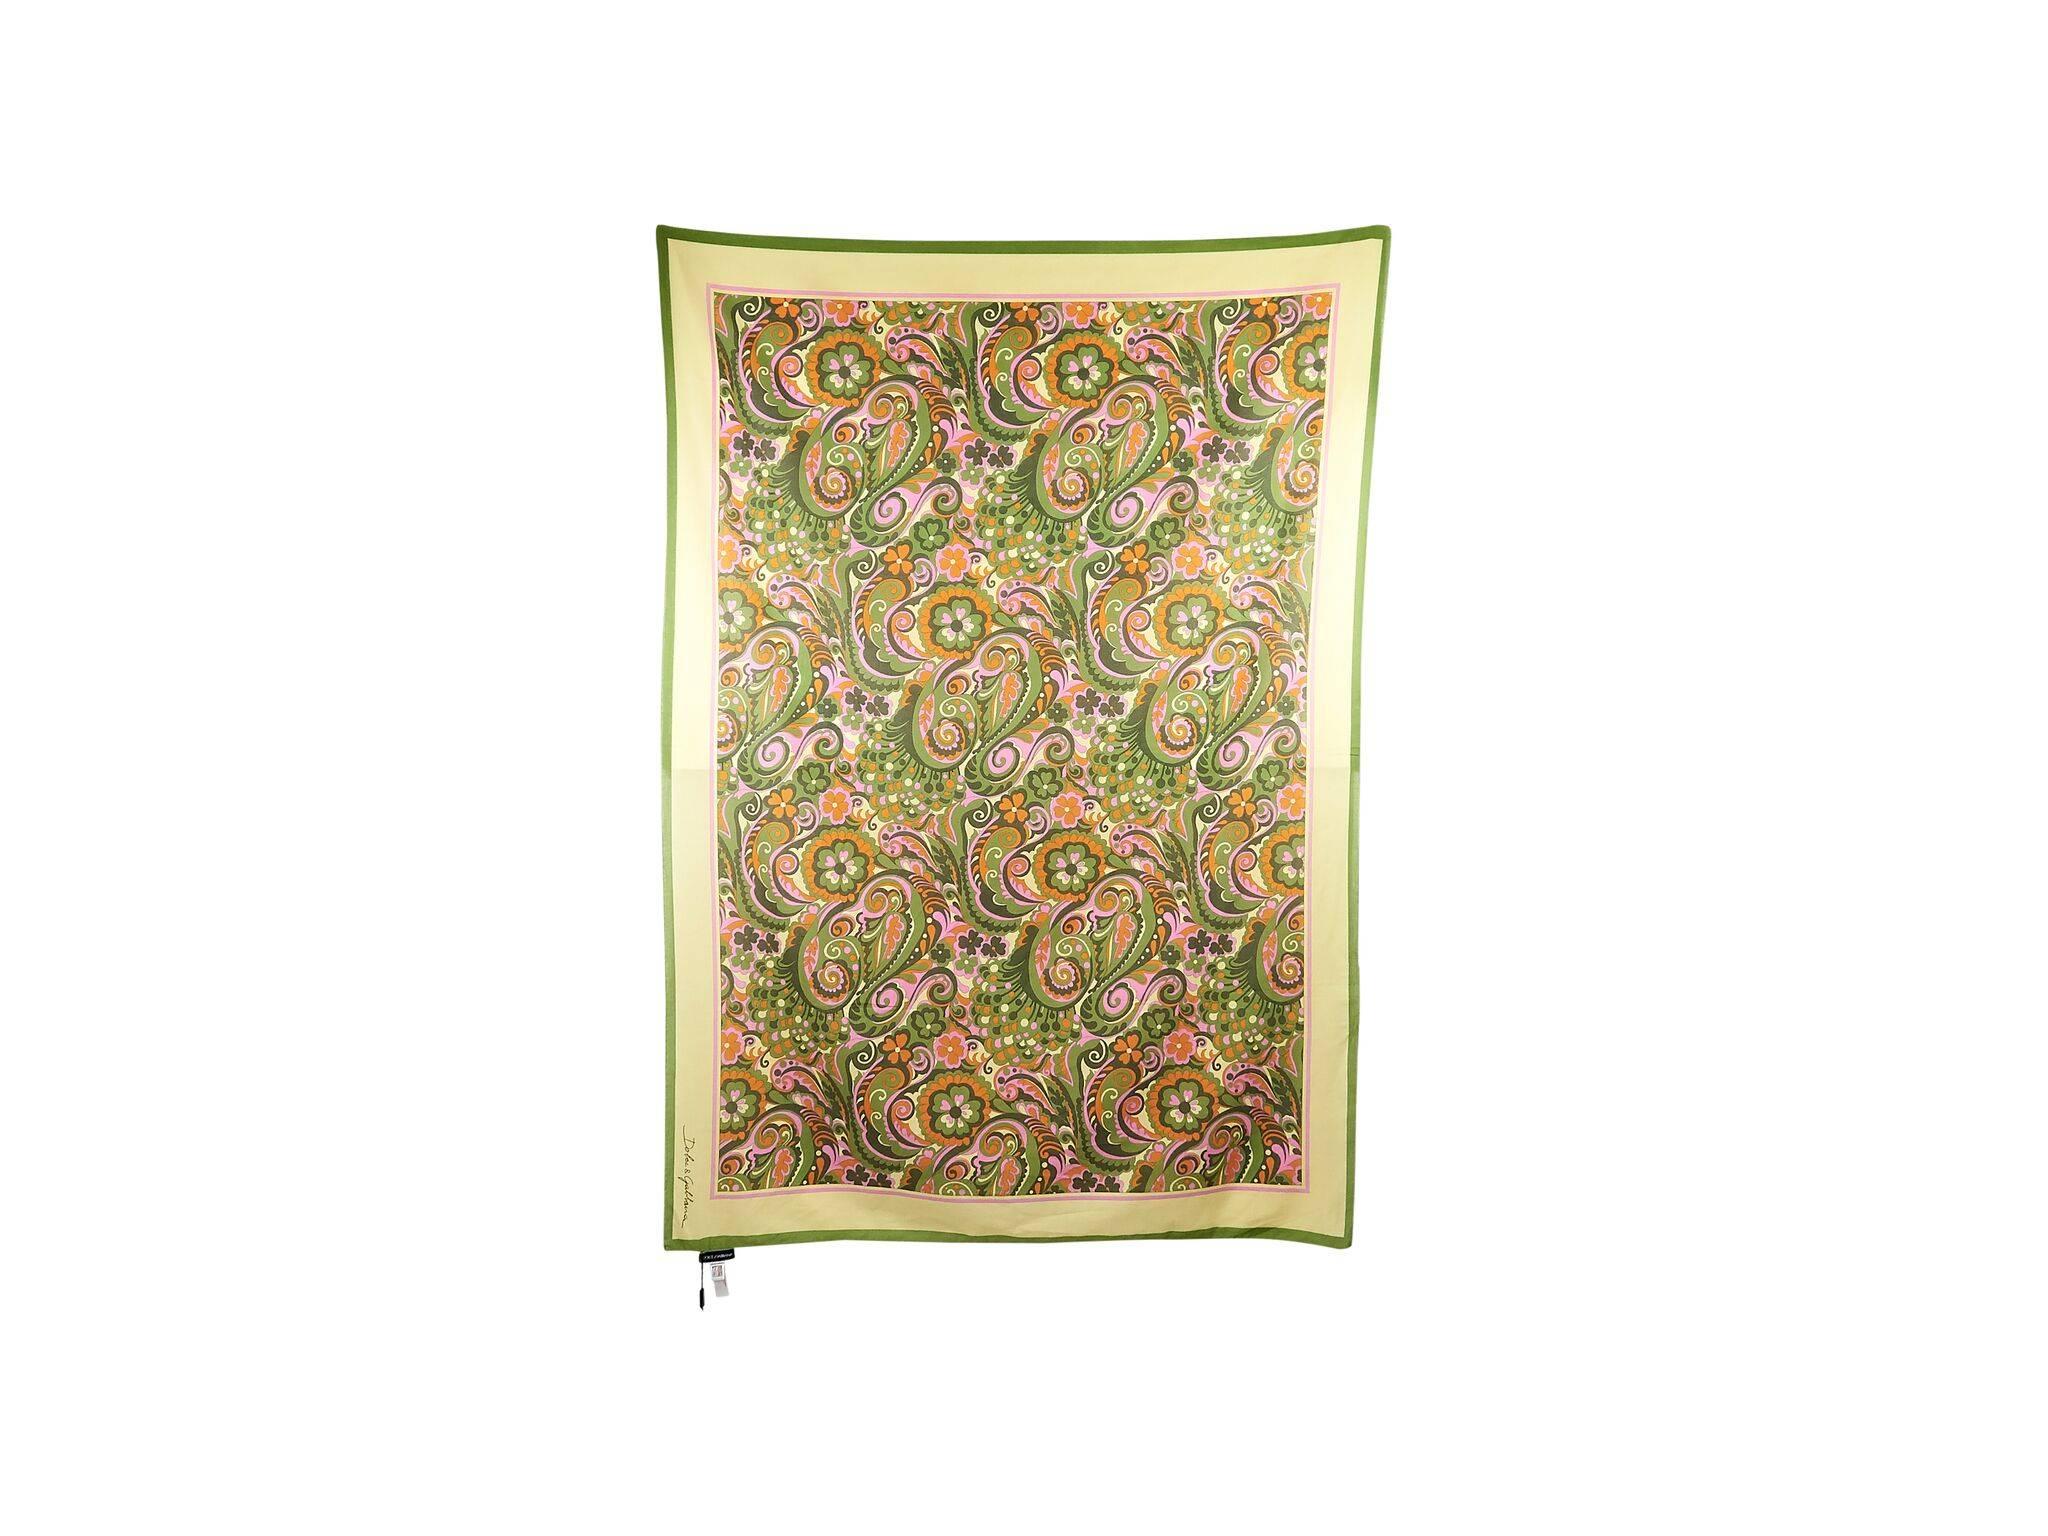 Product details:  Multicolor paisley-printed cotton scarf by Dolce & Gabbana. 
Condition: Pre-owned. New with tag.
Est. Retail $528